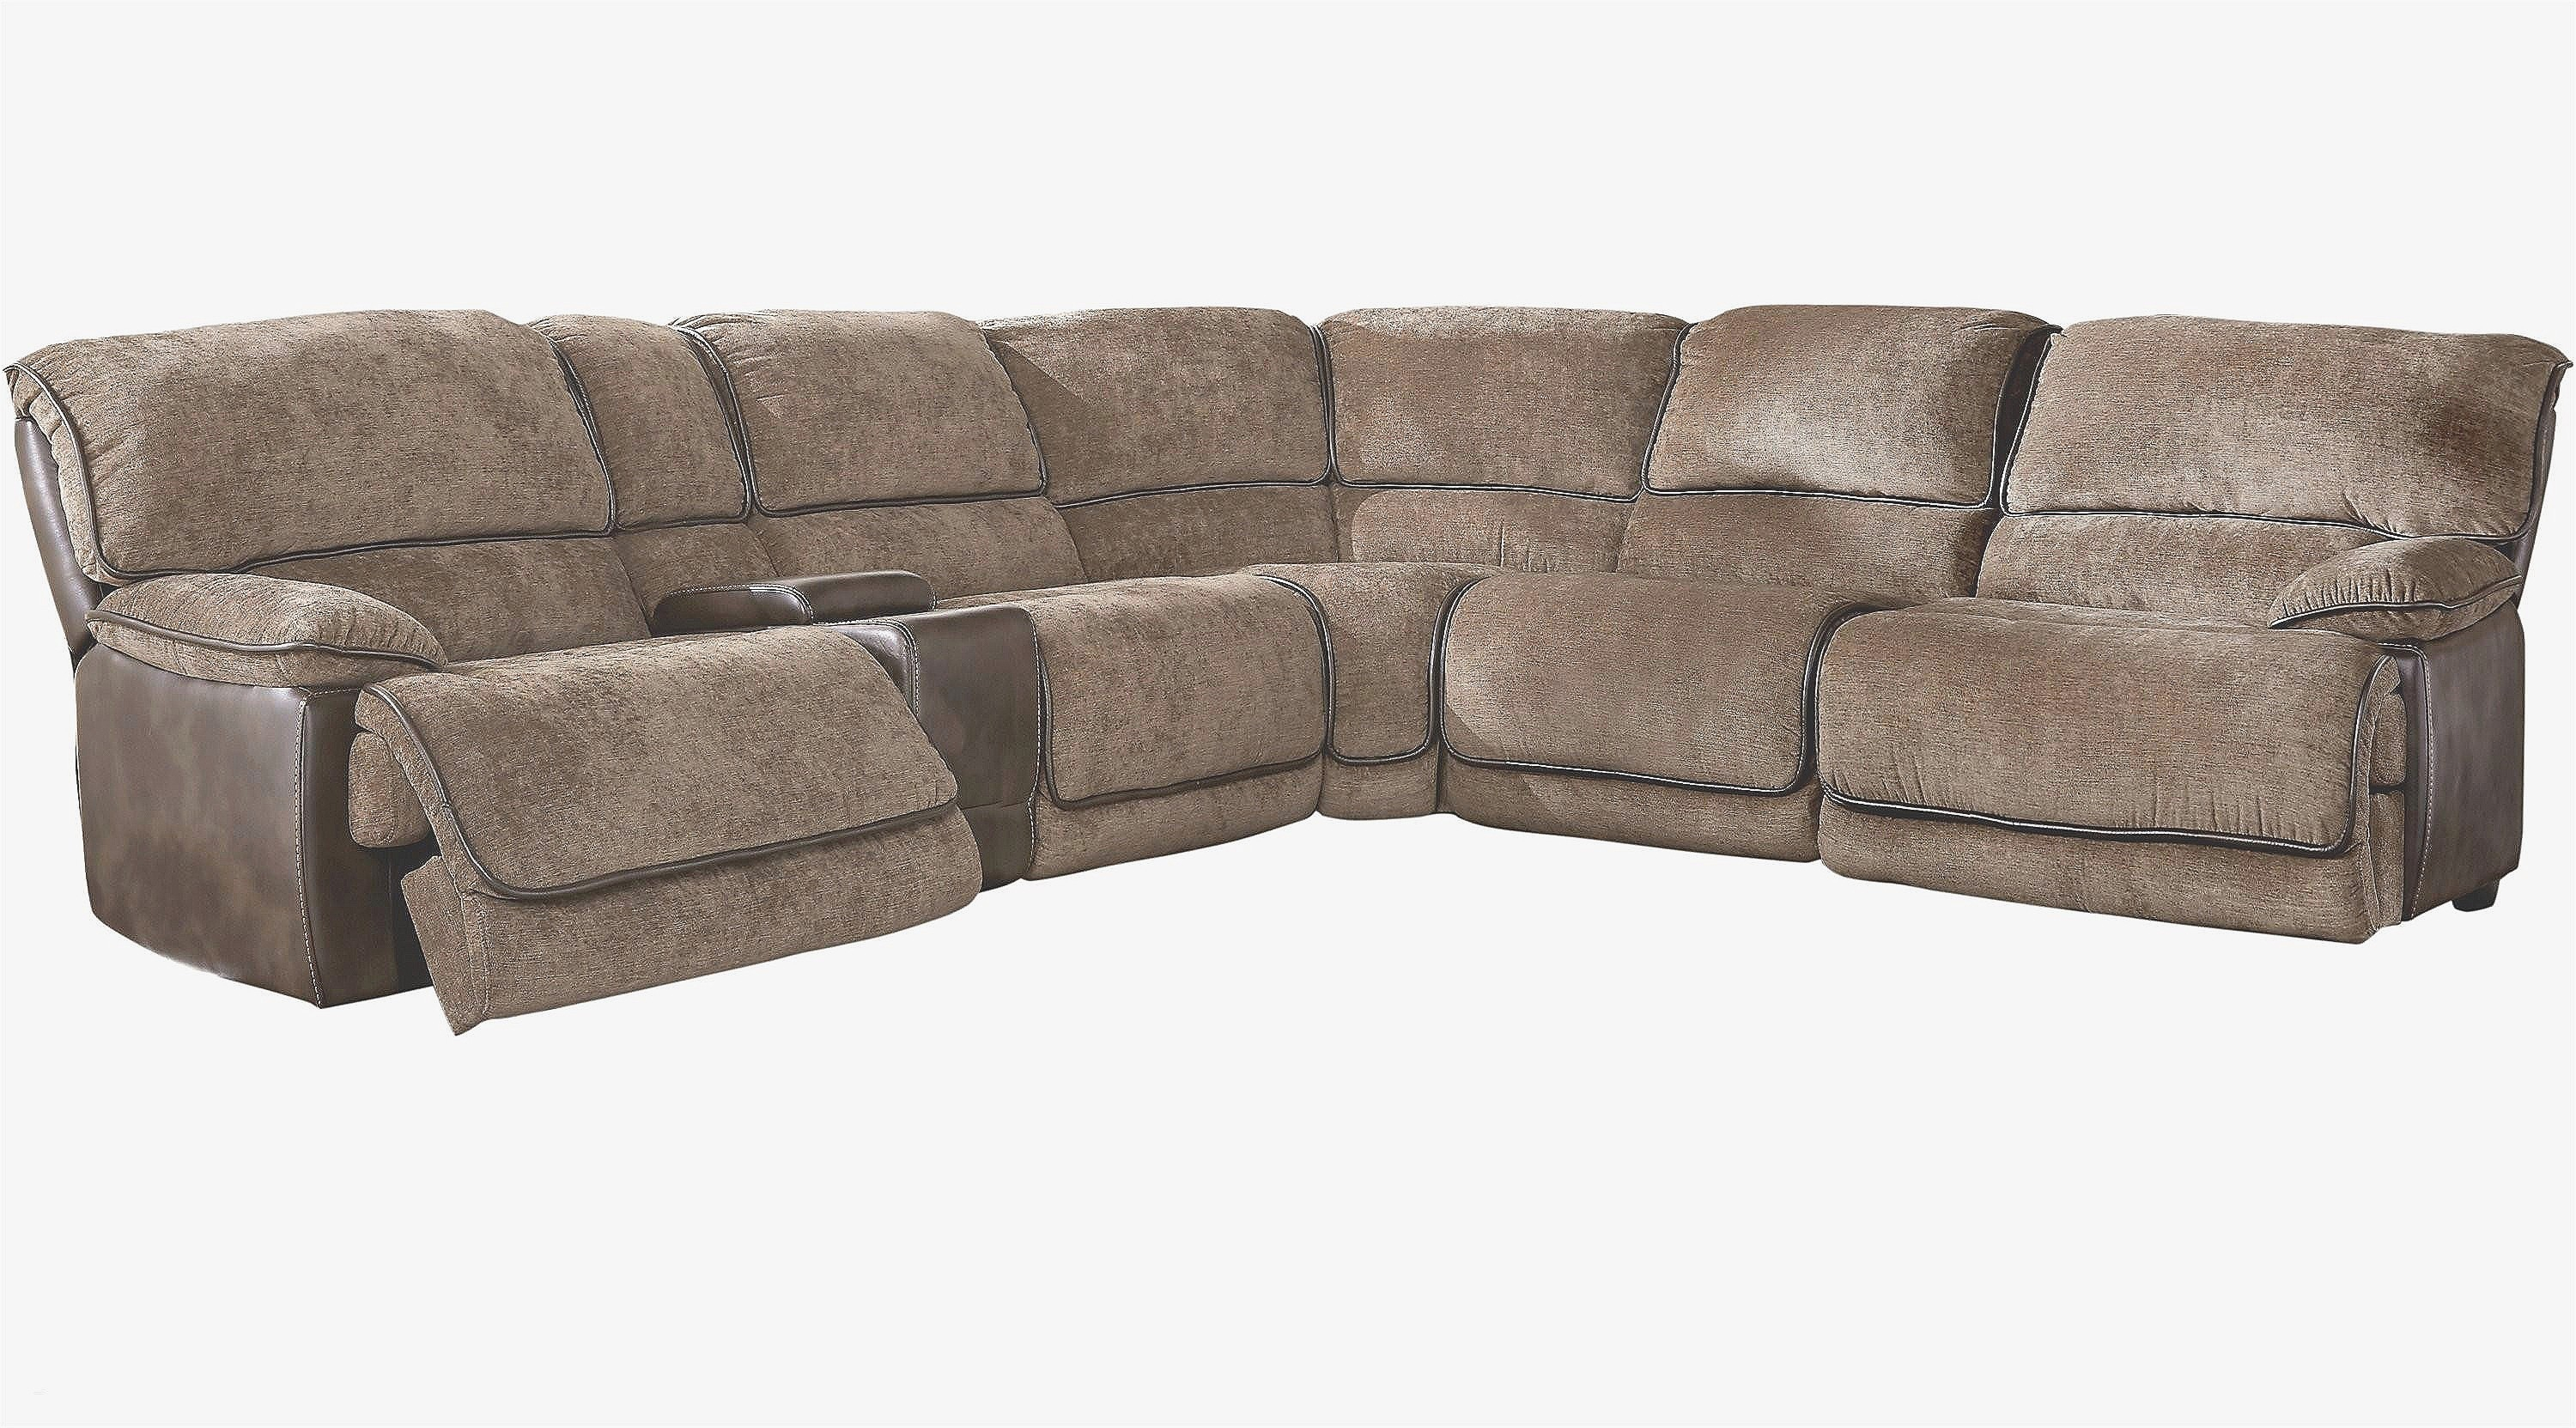 jcpenney leather sleeper sofa